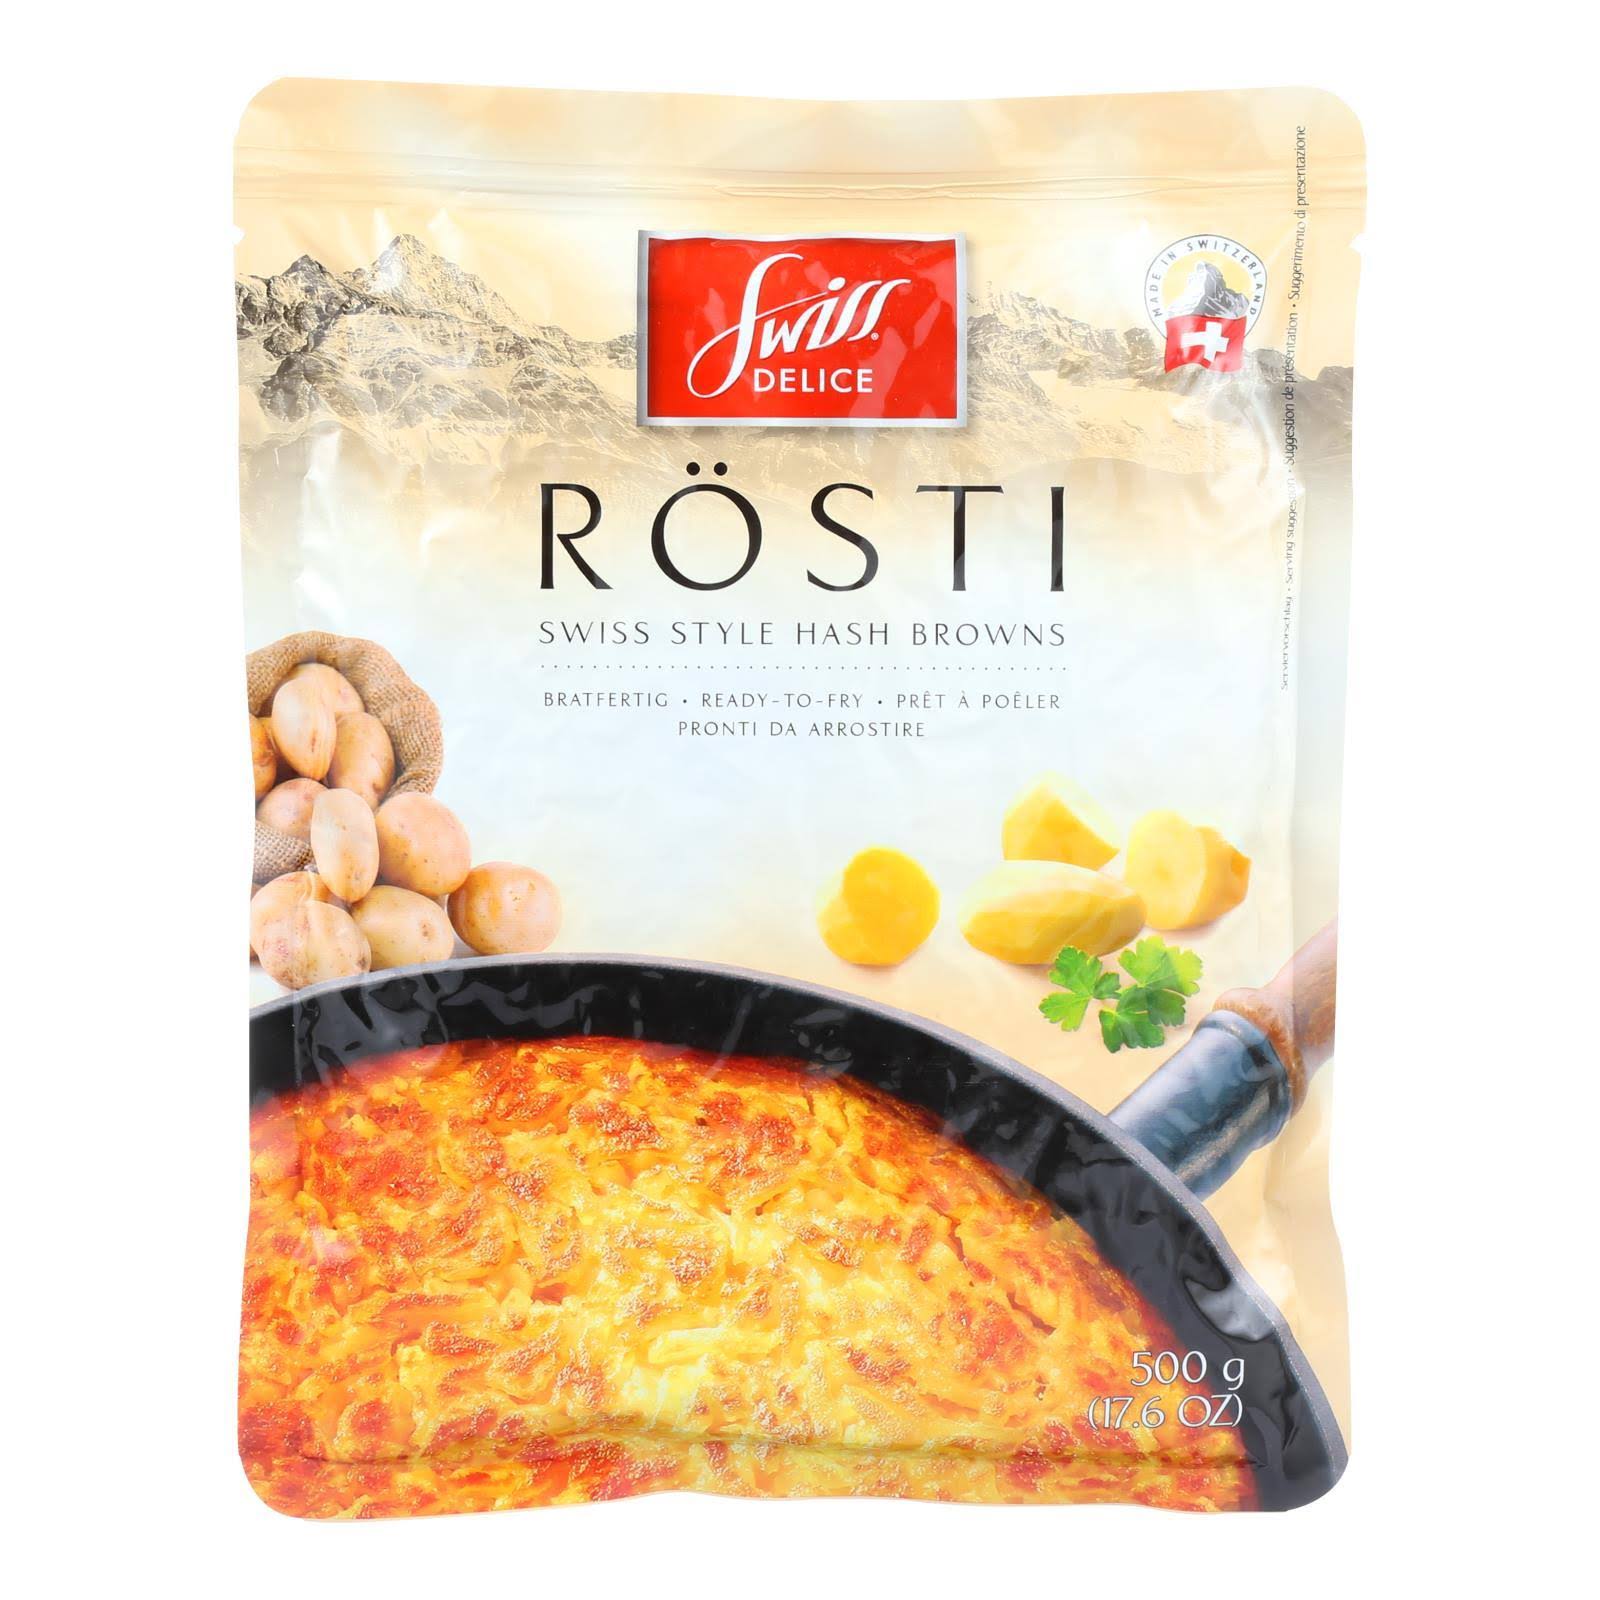 Swiss Delice Rosti Hash Browns 500g (Multipack of 10)